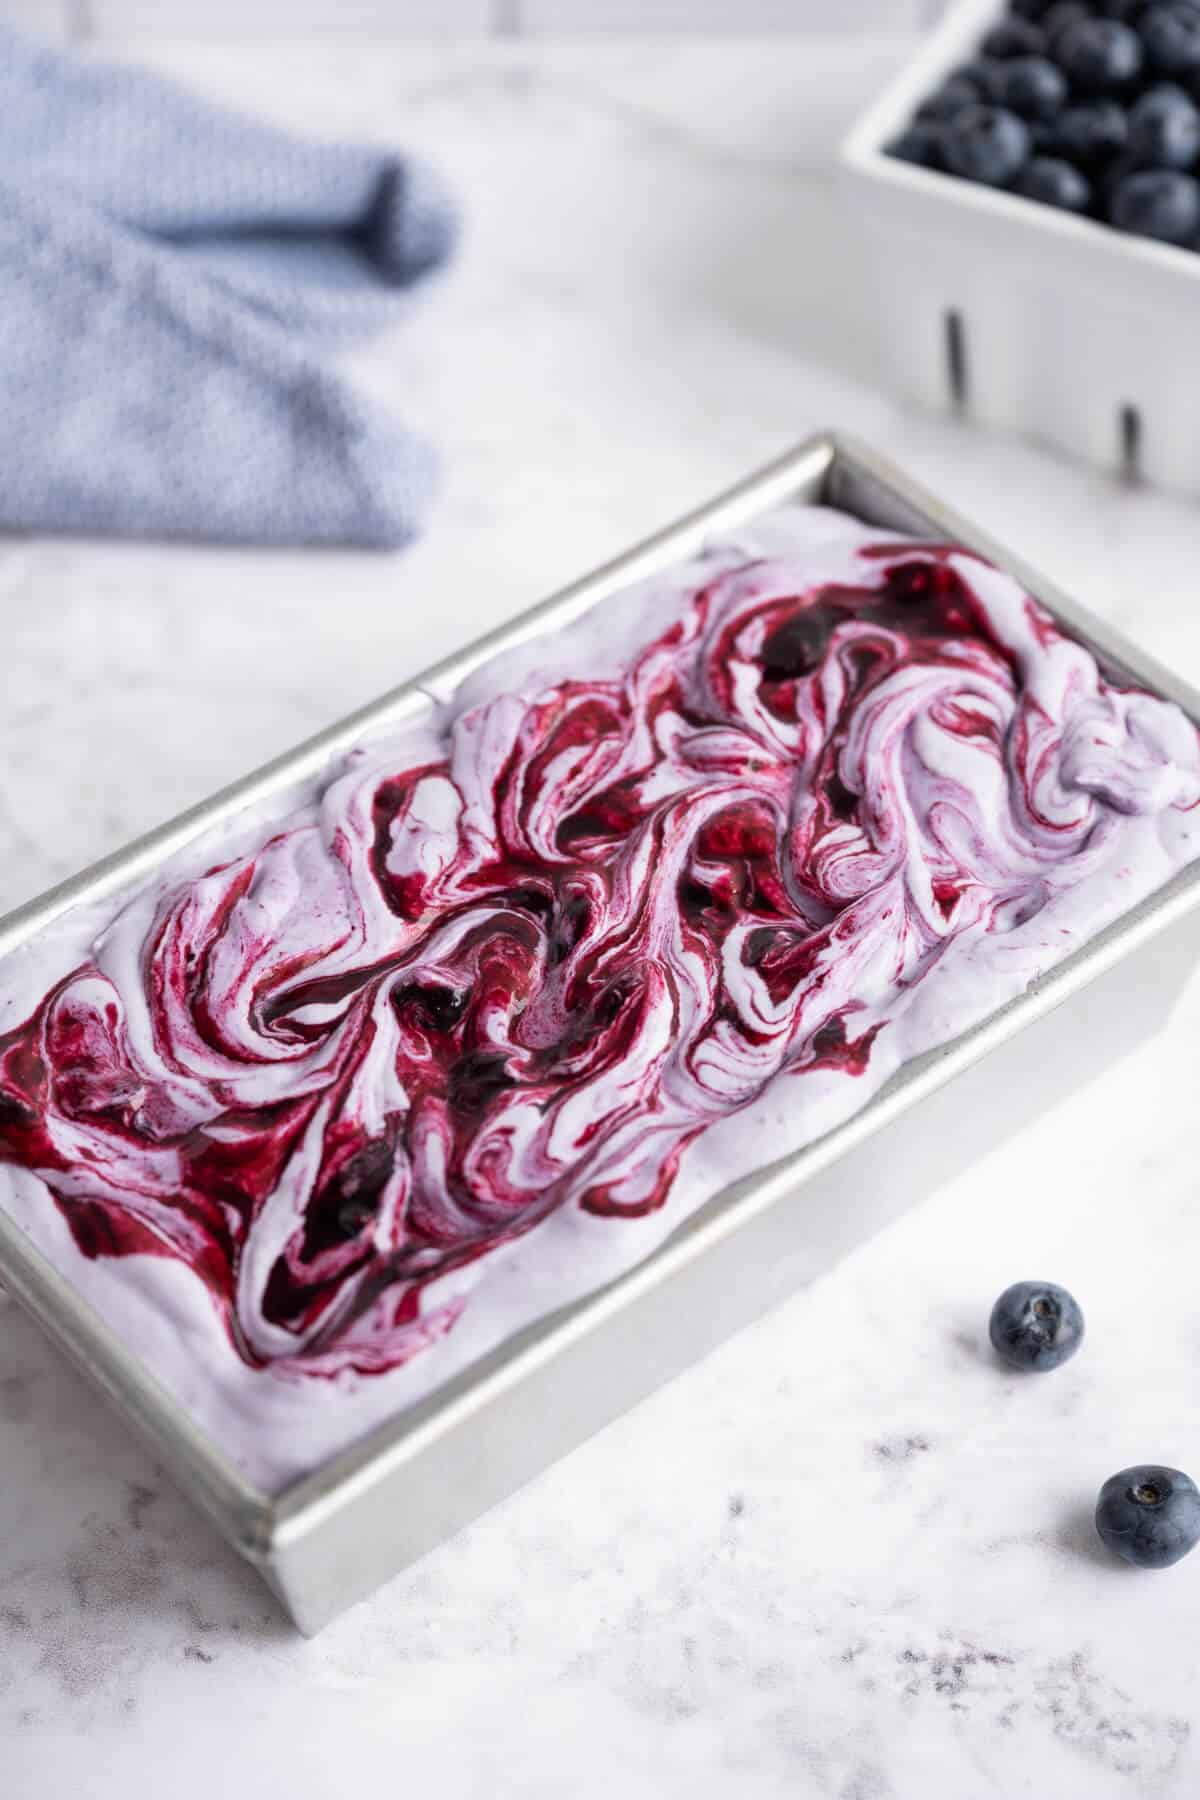 Blueberry Ice Cream Mixture in a loaf pan ready to freeze. The top has blueberry sauce swirled in.